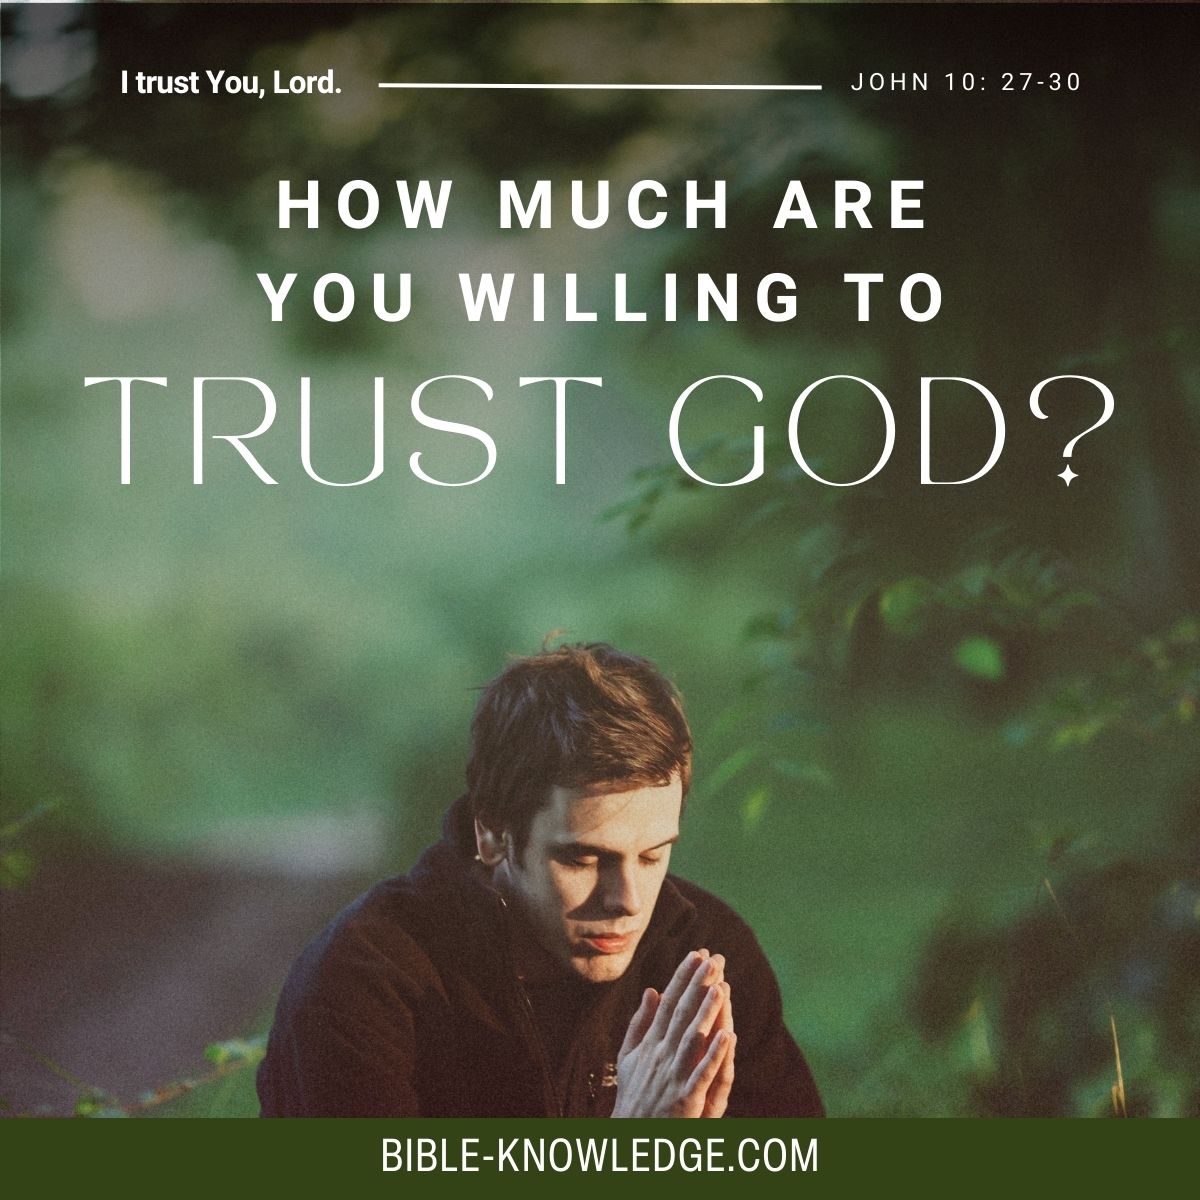 How Much Are You Willing To Trust God?